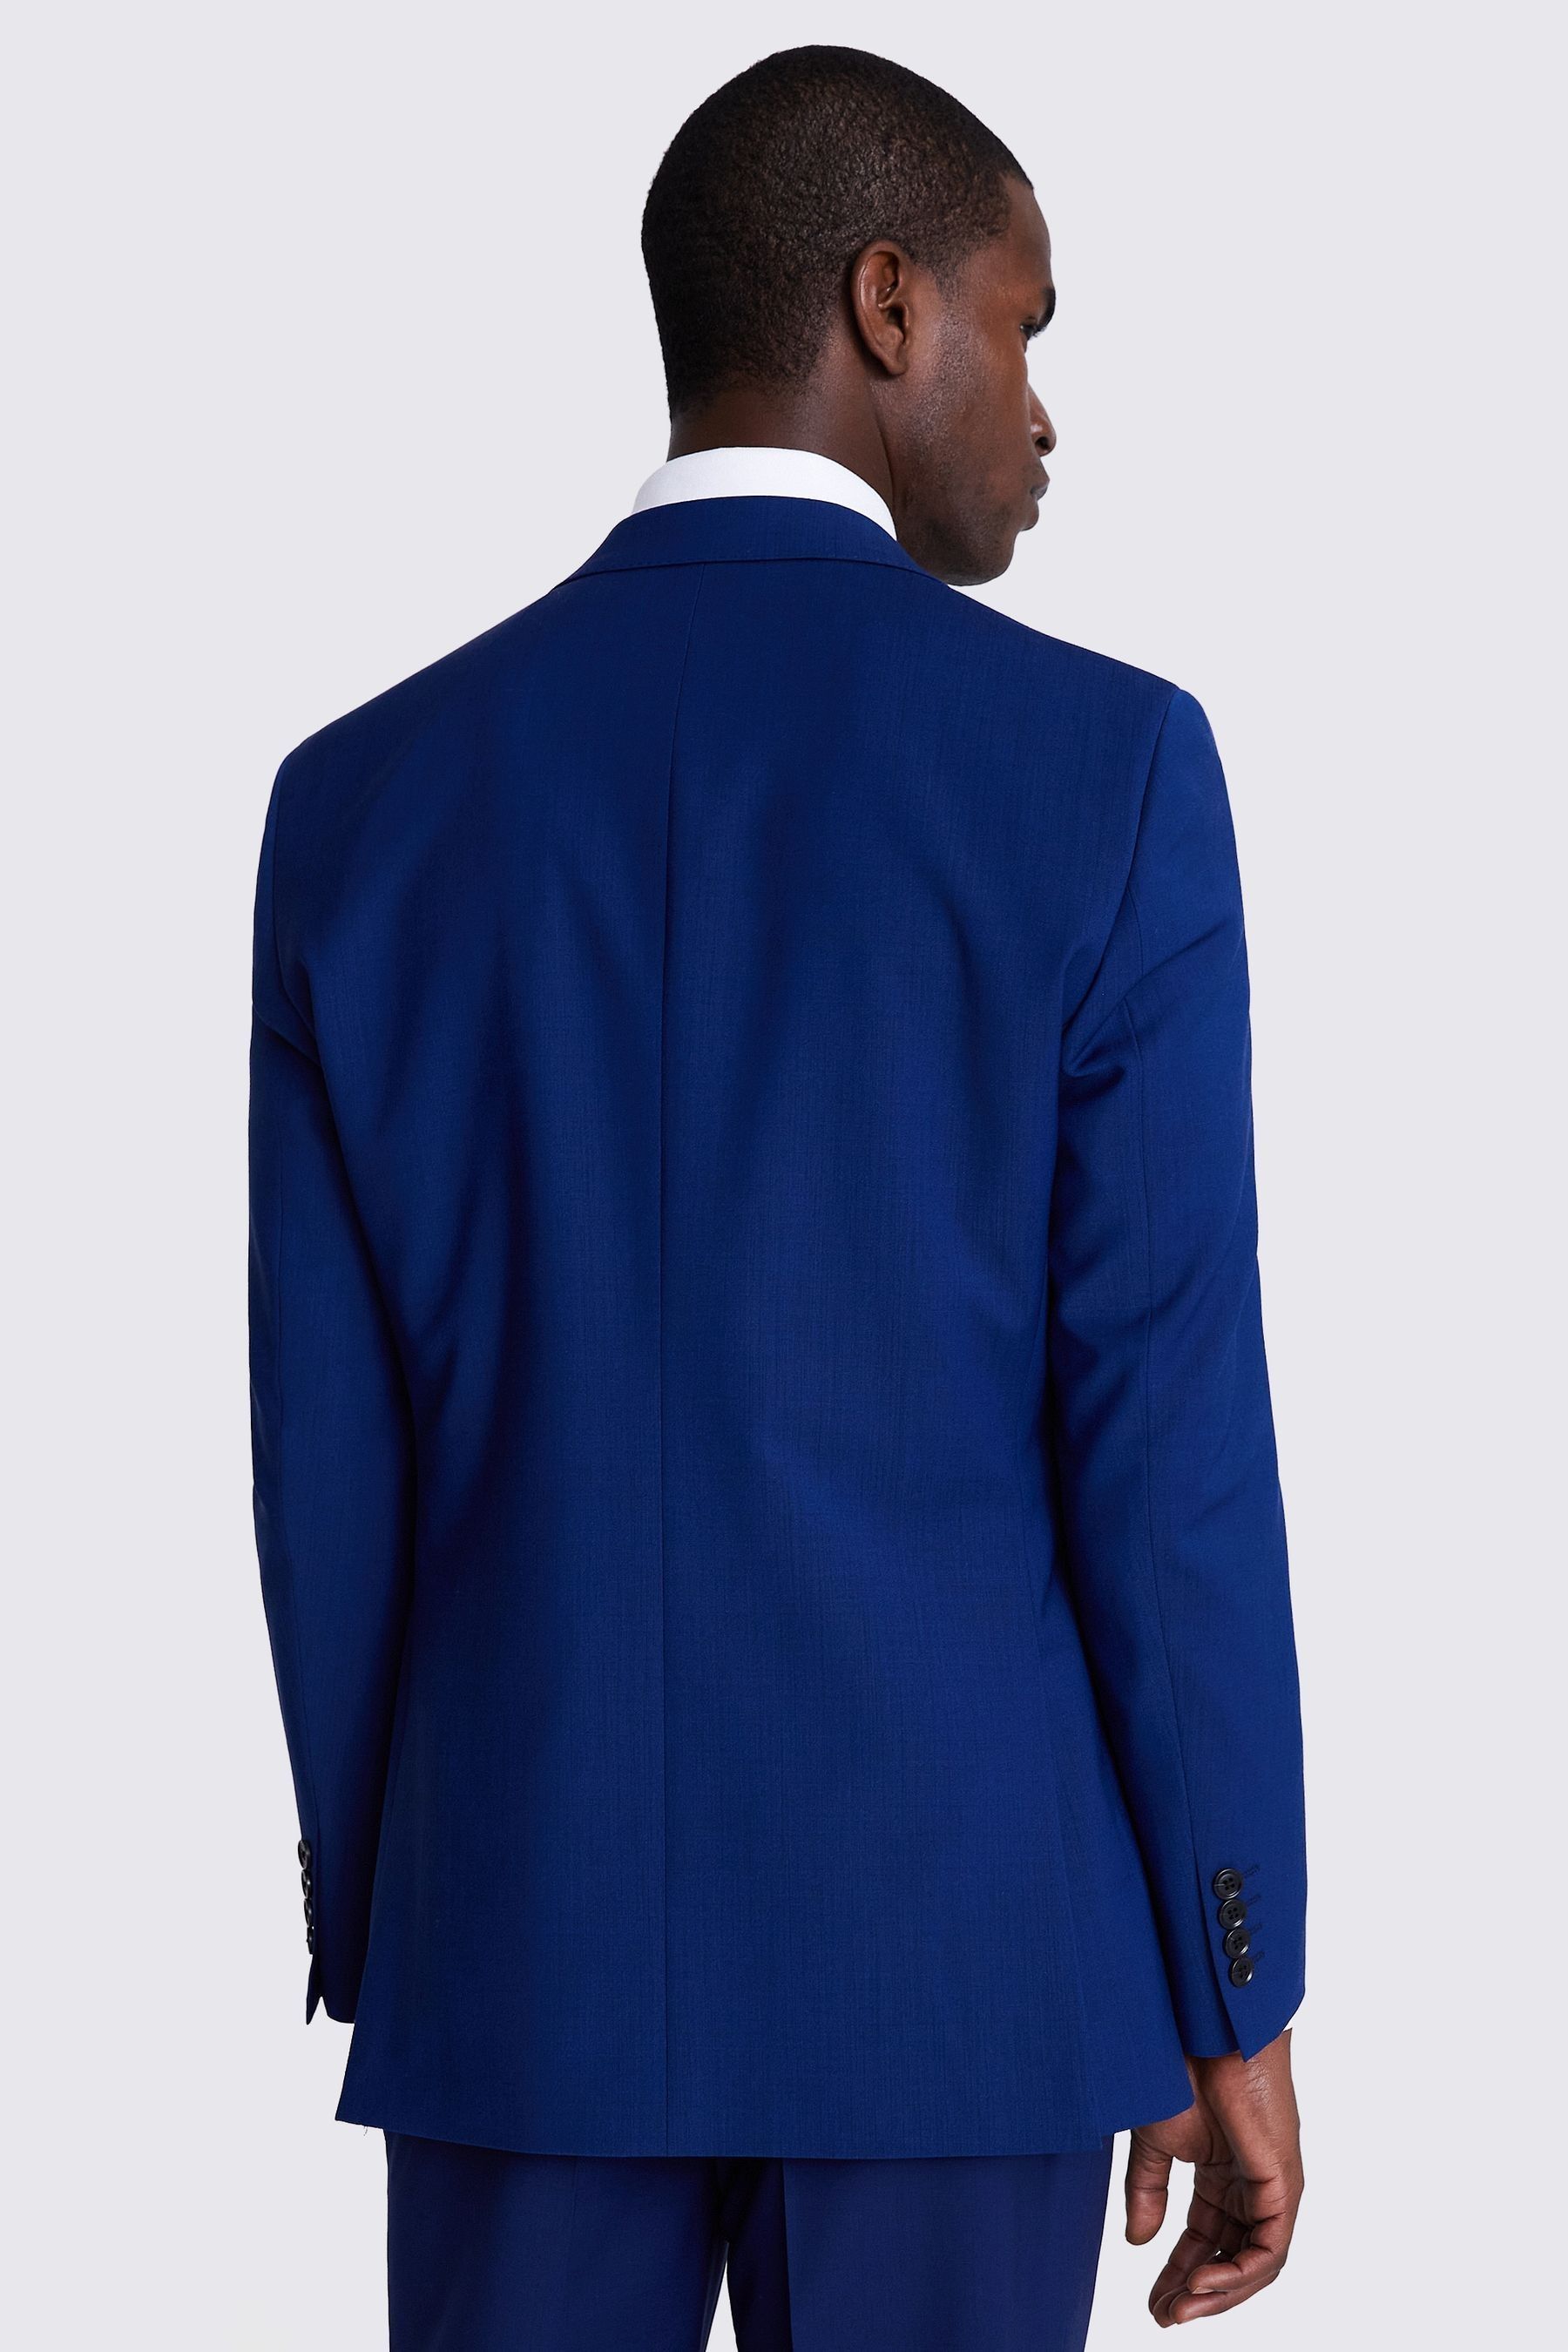 Buy MOSS Performance Royal Blue Suit: Jacket from the Next UK online shop